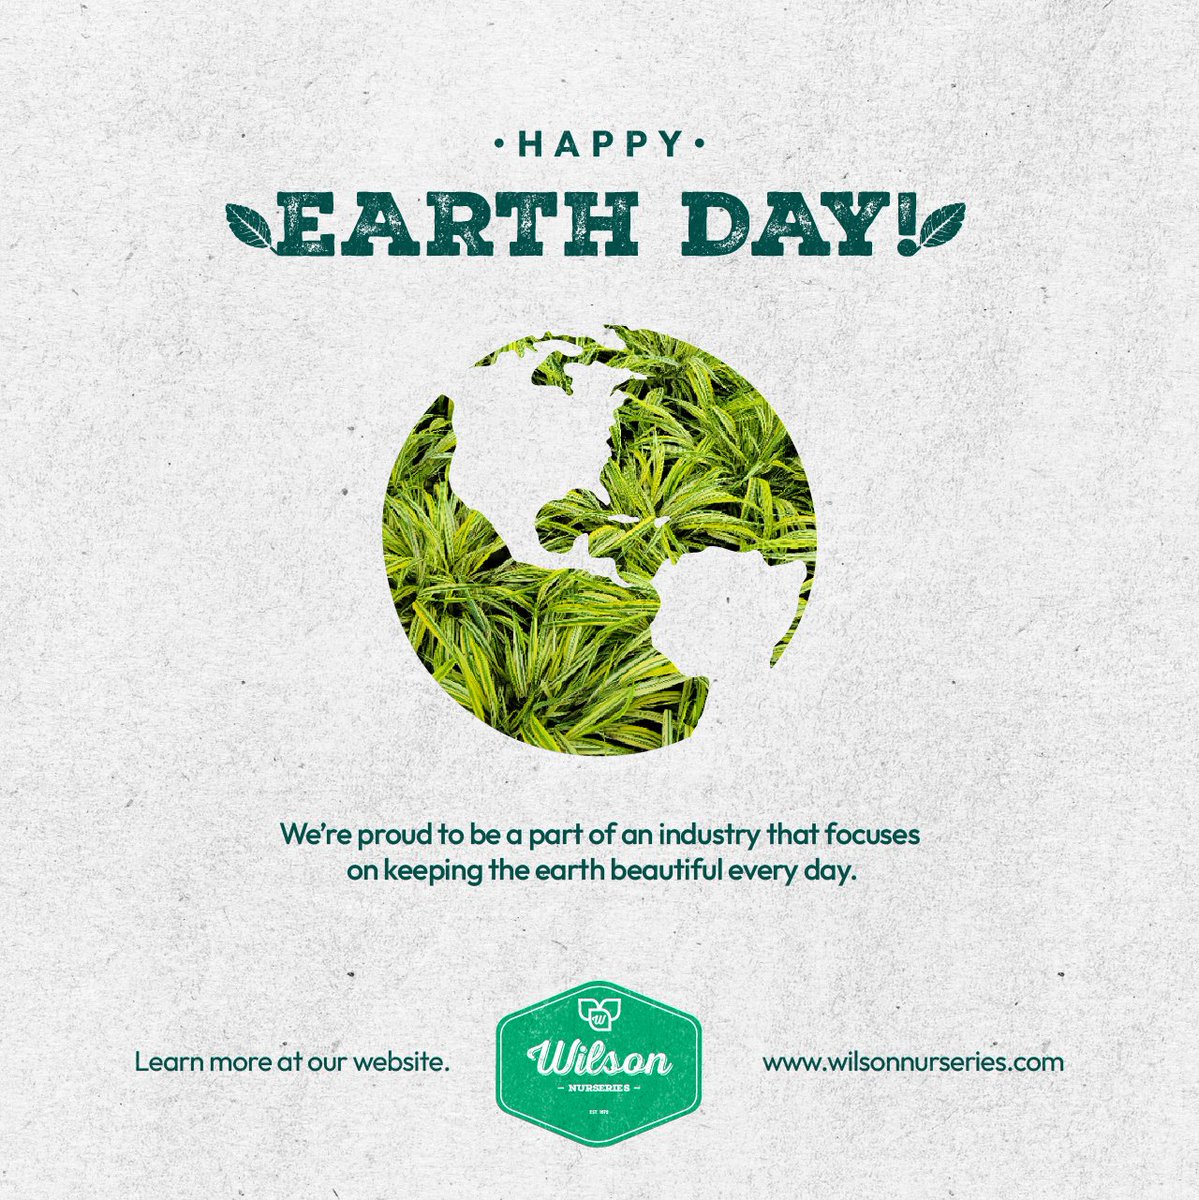 Happy Earth Day! We appreciate all the wonderful things our Mother Earth has to offer and we hope you all do too.
-
-
-
 #plantnursery #plants #gardening #wilsonnurseries #chicago #illinois #earthday